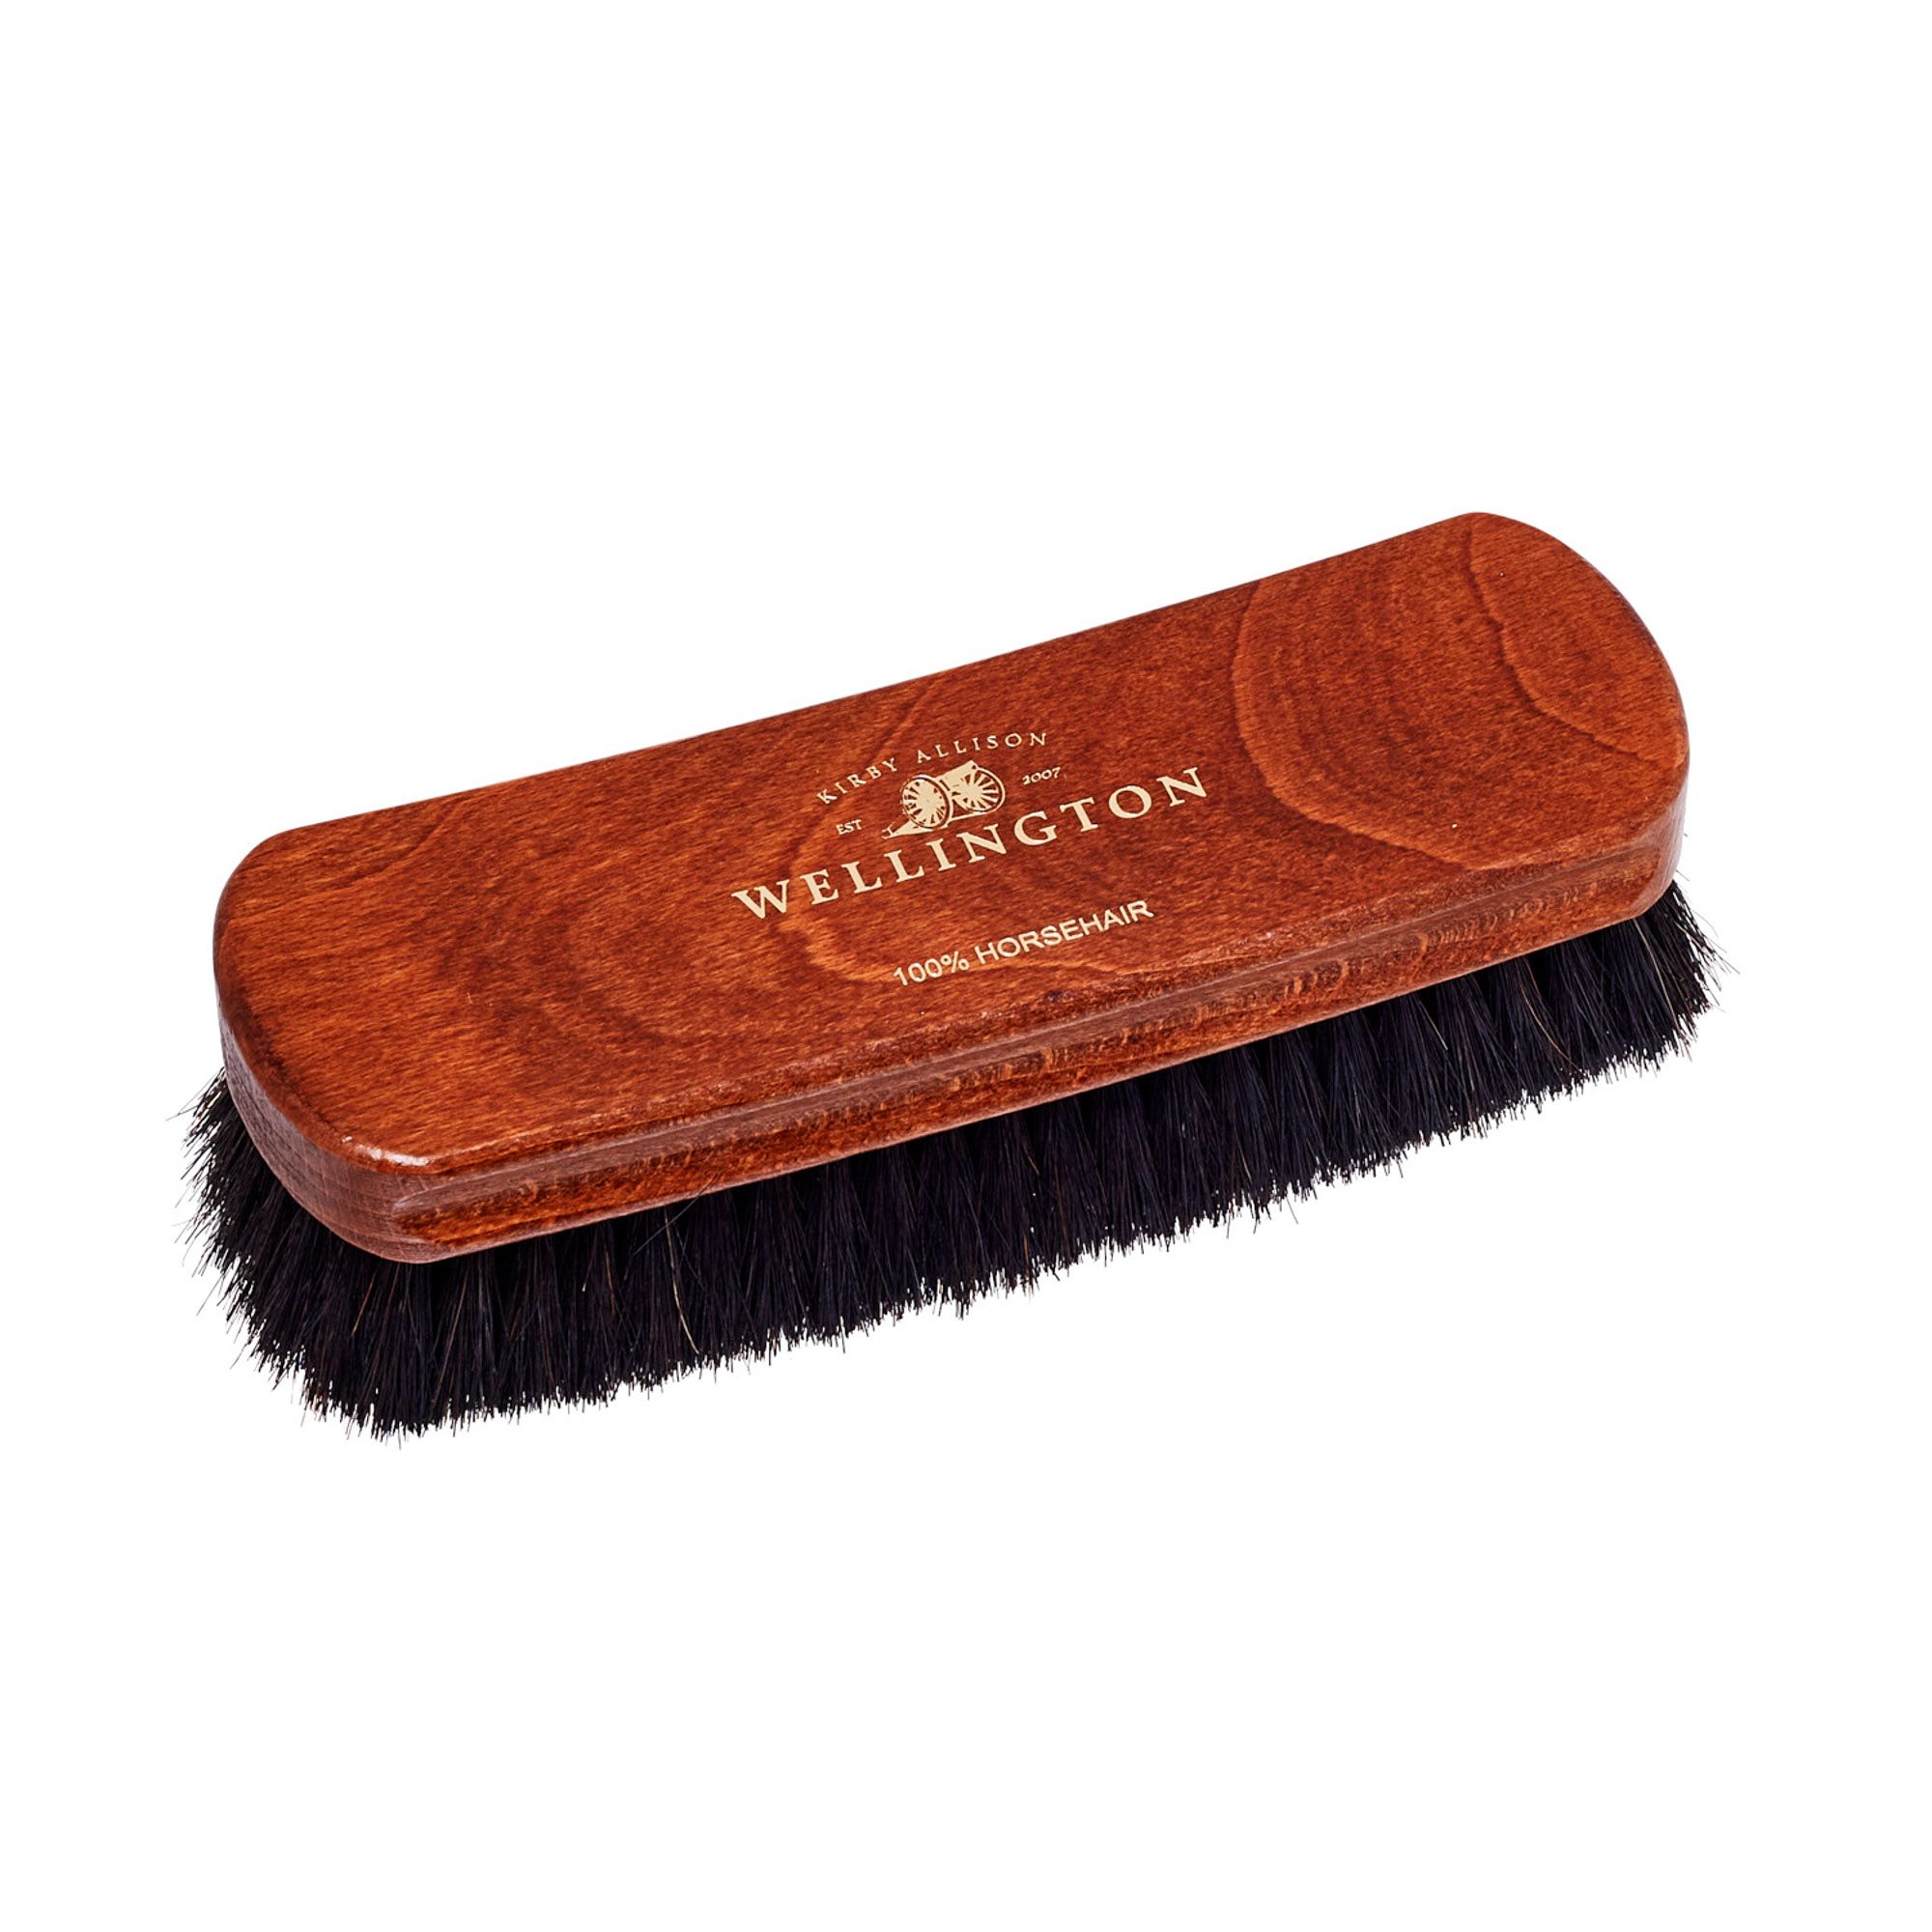 Which is best, German Horsehair Shoe Shine Brush or Goat Hair?